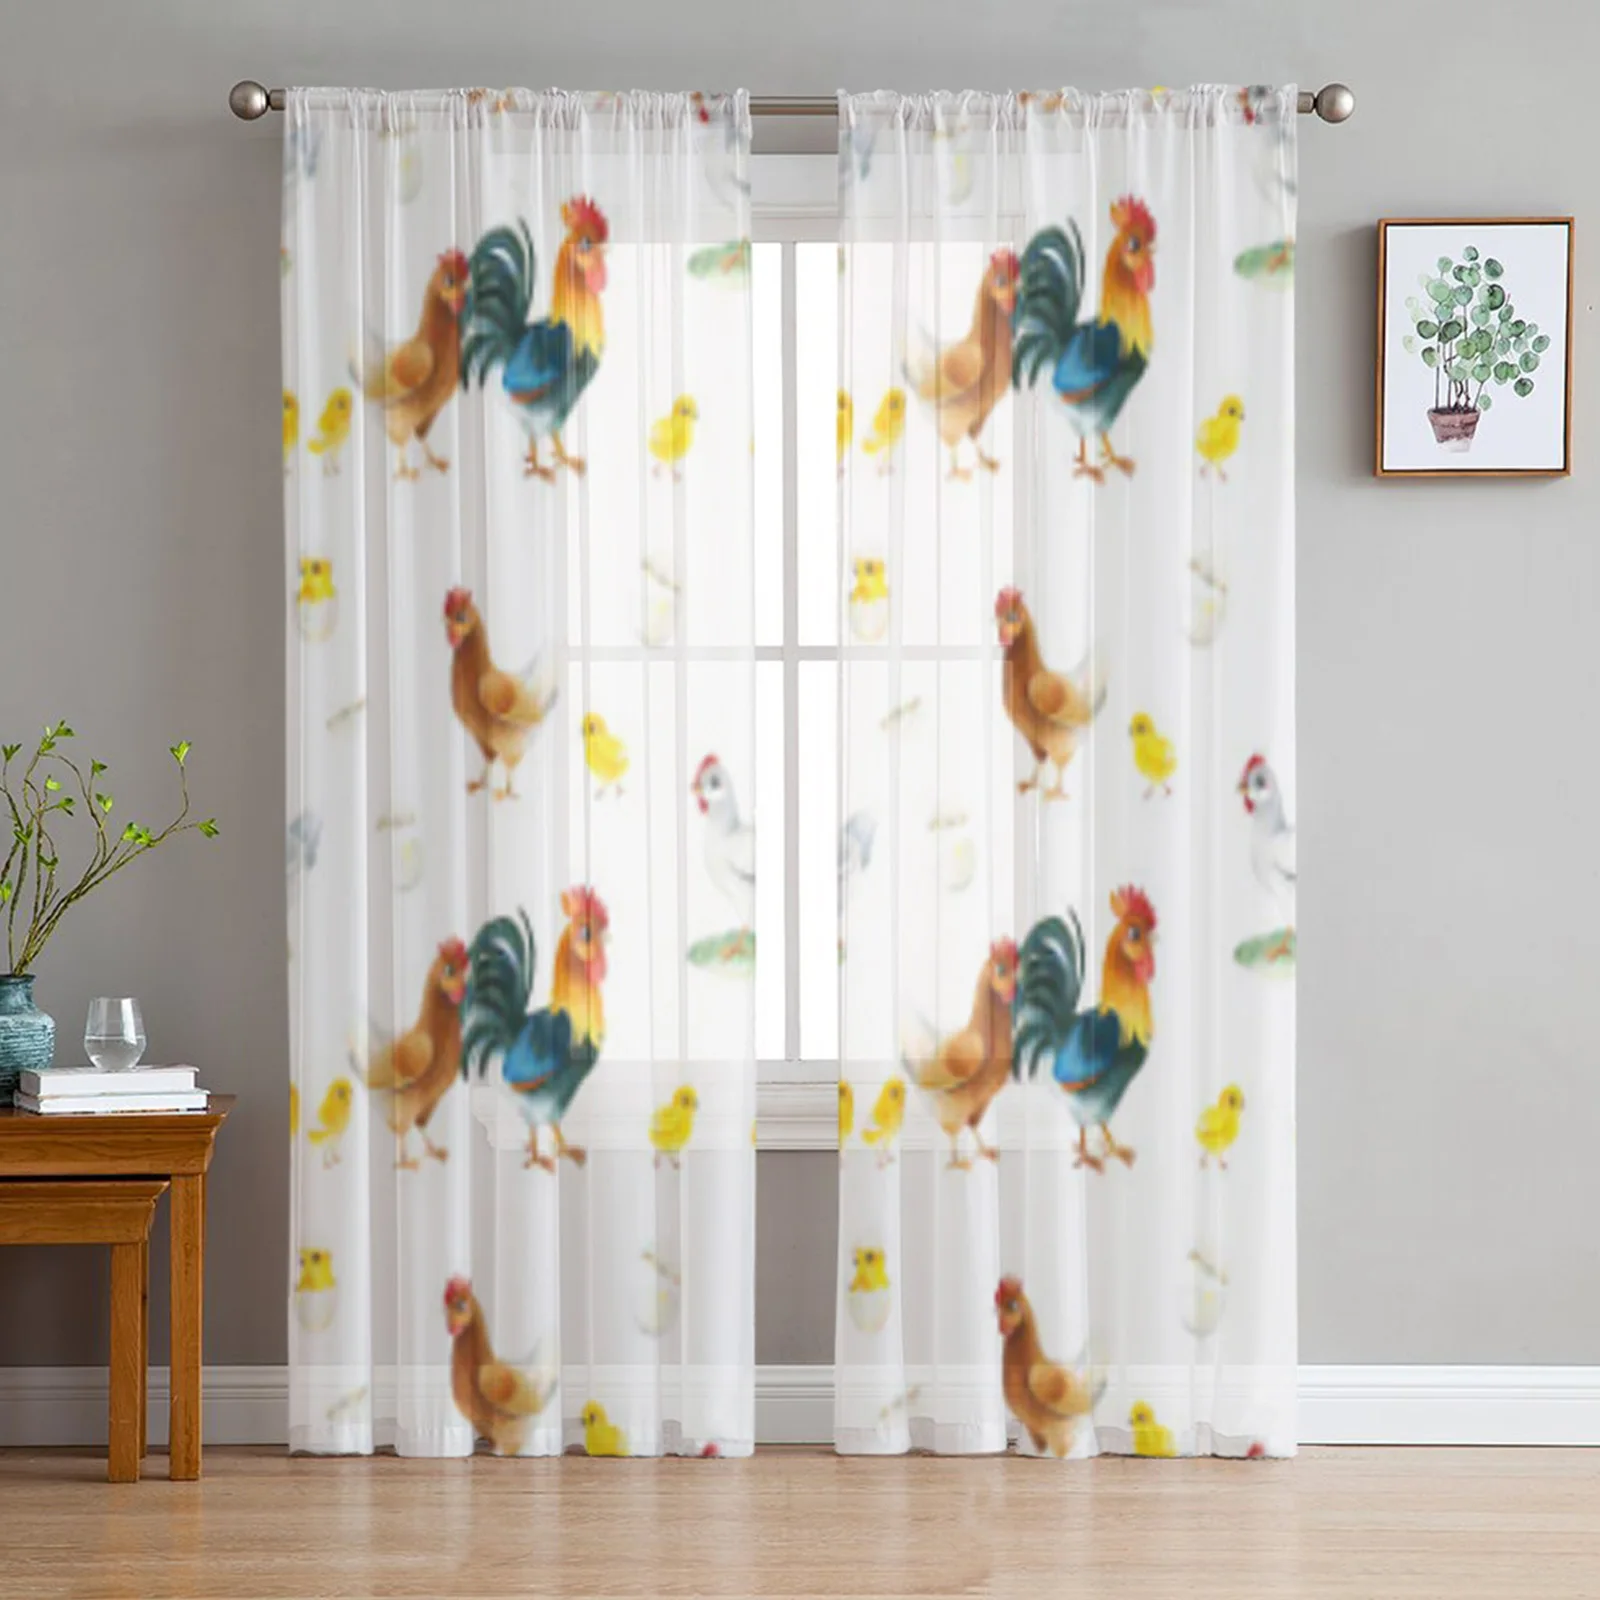 

Farm Watercolor Rooster Hen Chickens Tulle Sheer Window Curtain for Living Room Bedroom Voile Organza Decorative Curtains Drapes